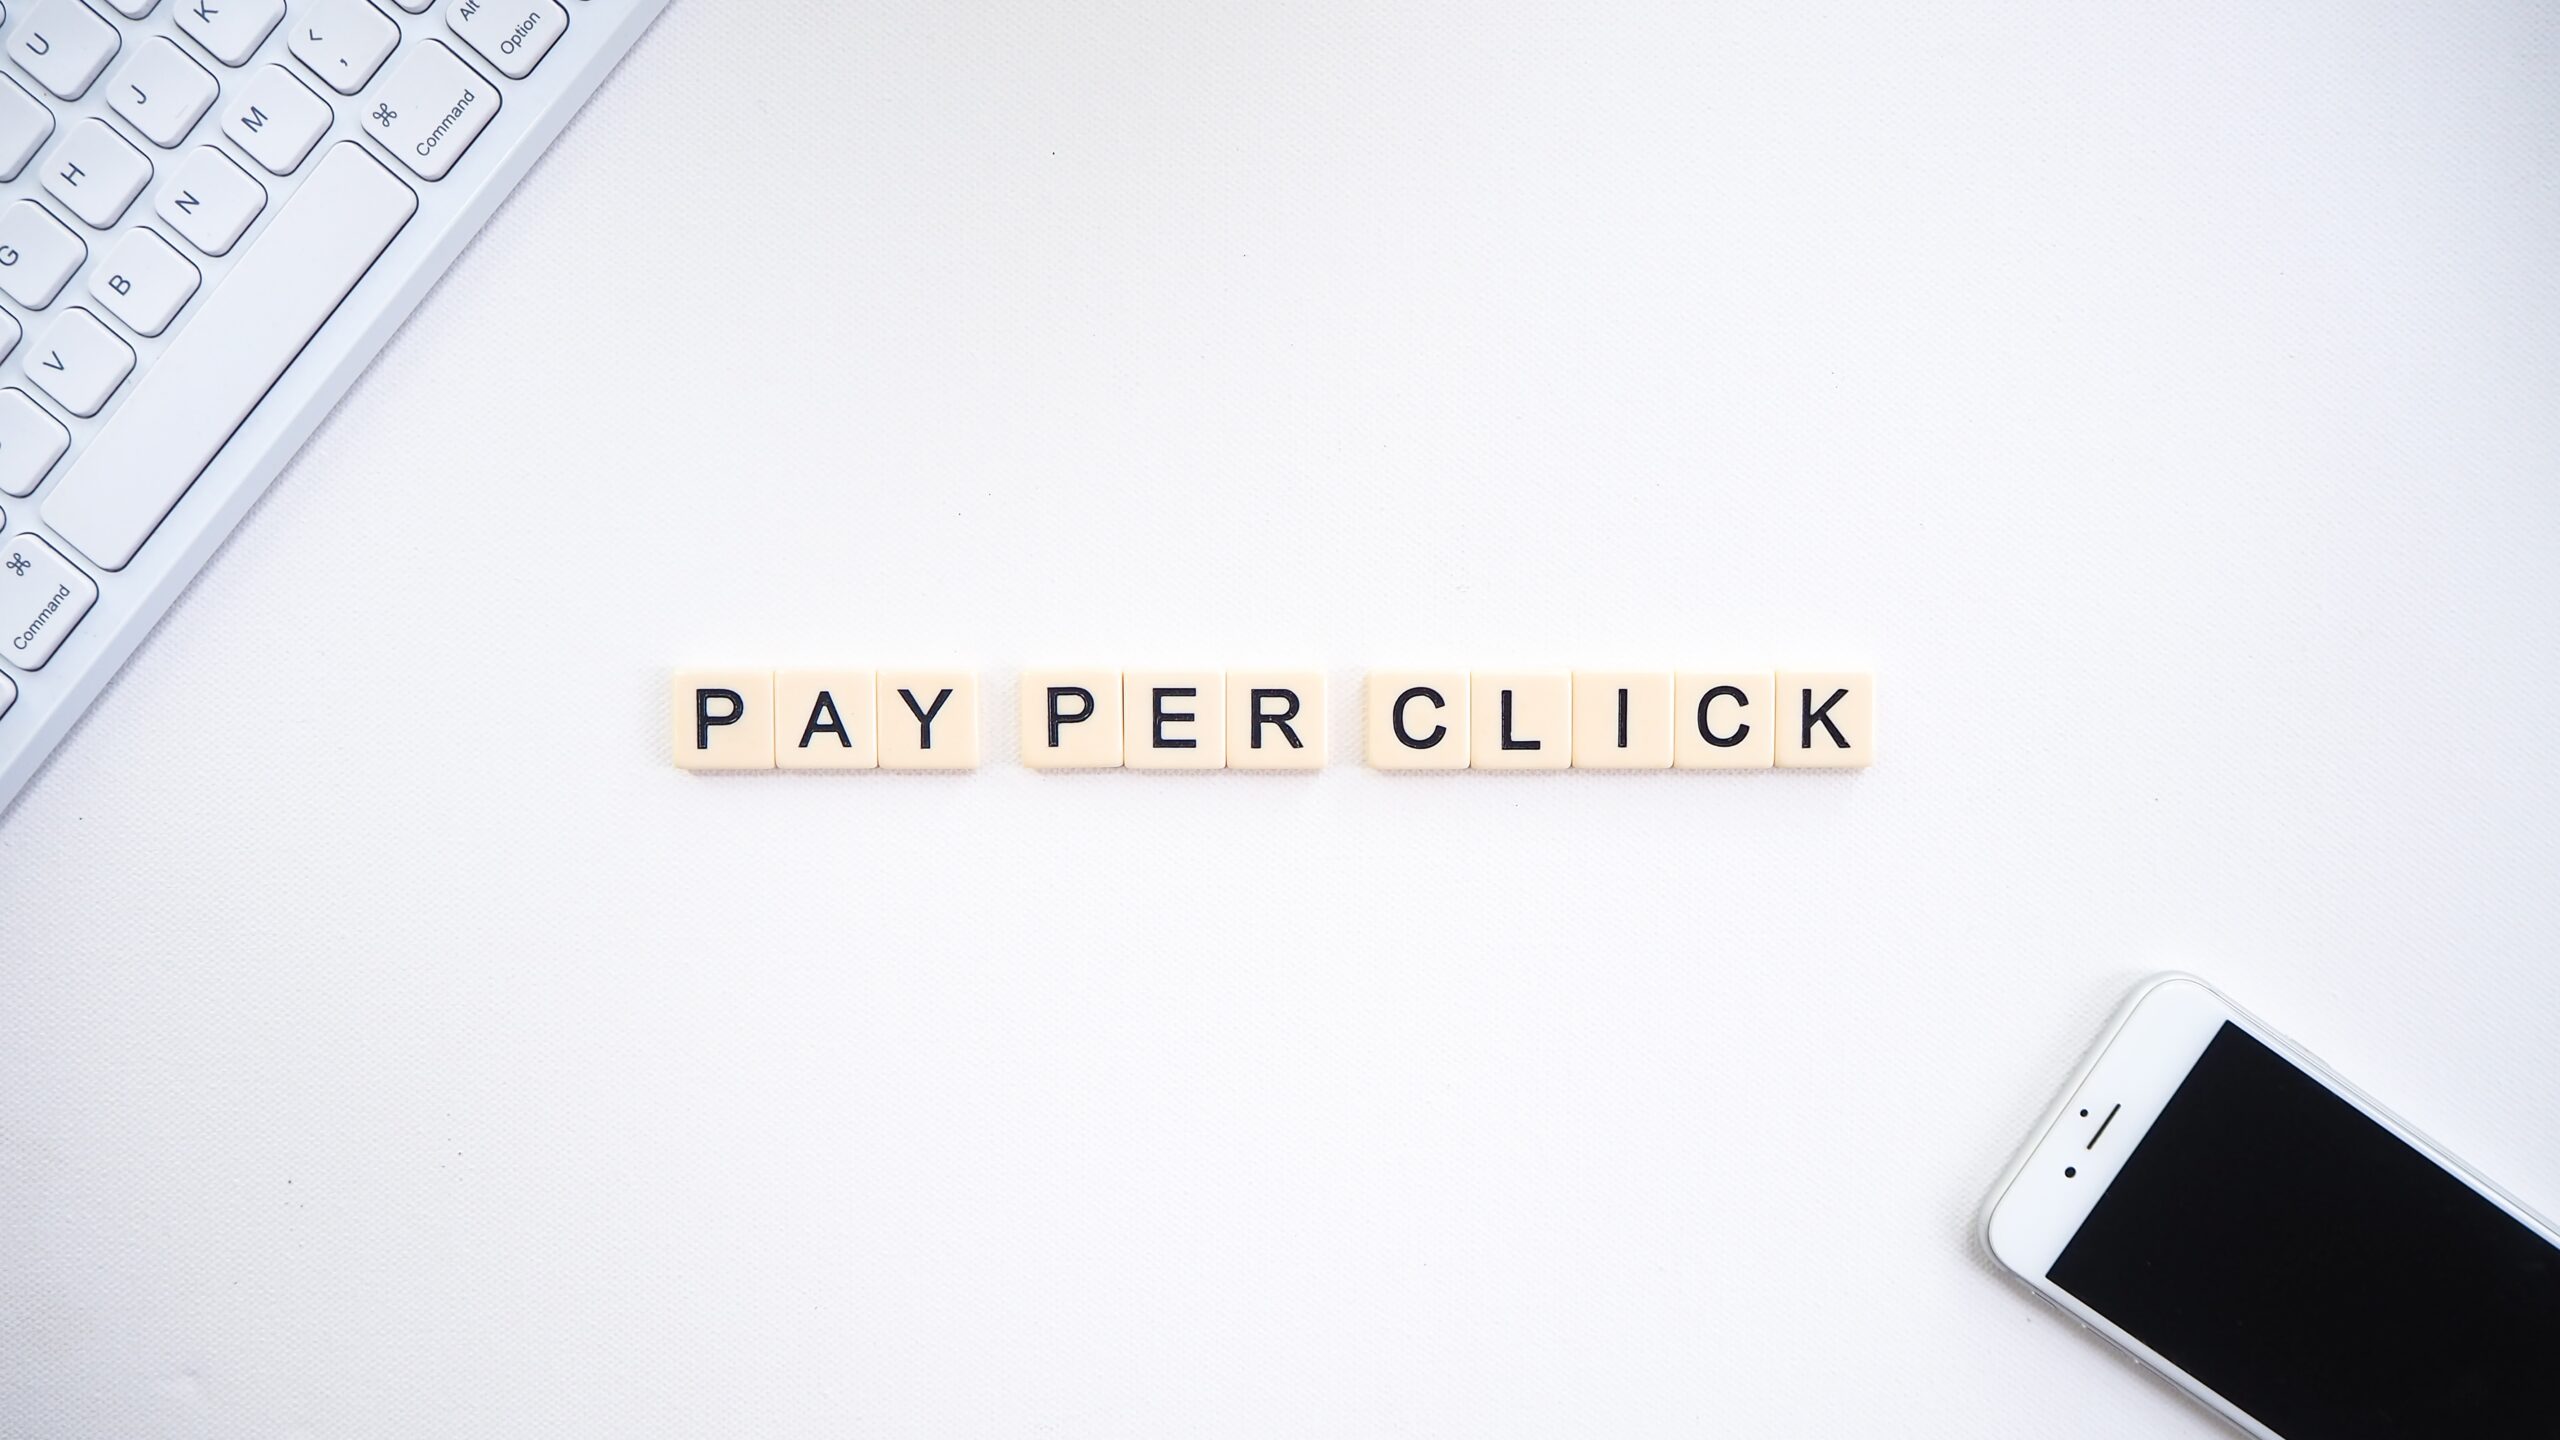 ppc-campaign-management-ppc-agency-digital-marketing-angecy